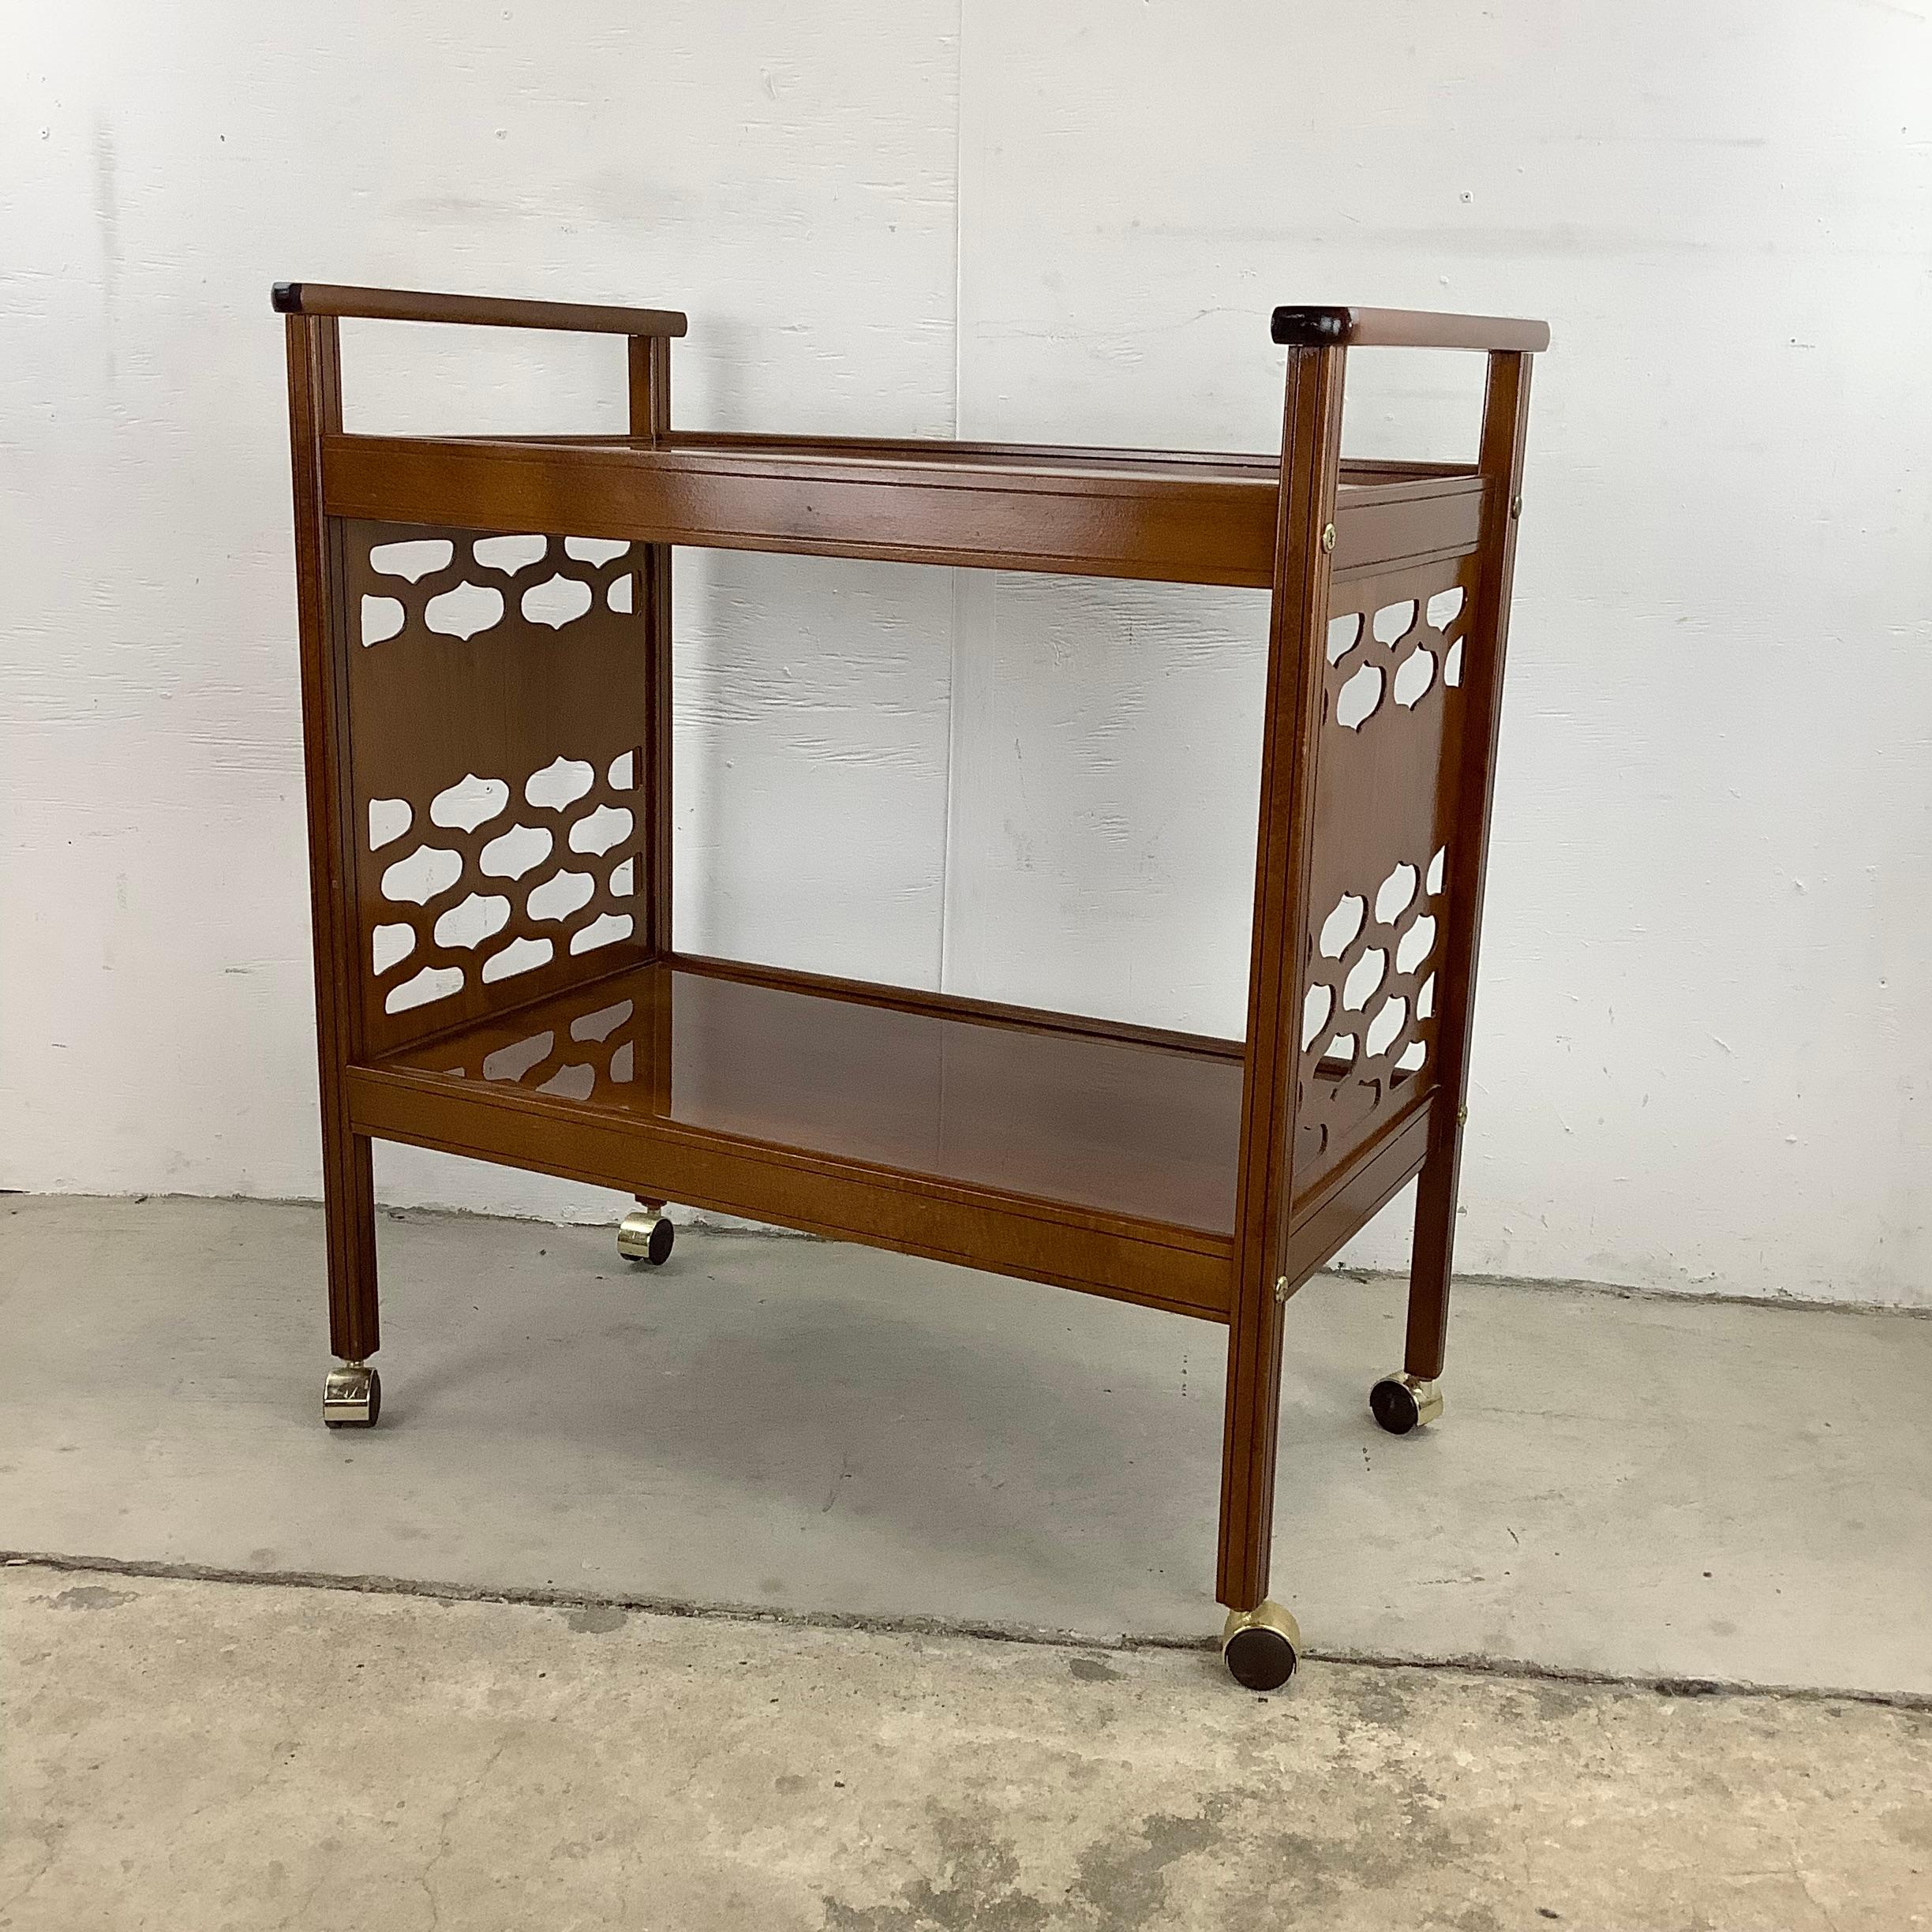 This two tier rolling bar cart or tea cart features MCM style decorative sides with wide open shelves for plenty of storage. Easily rolls from room to room for barware storage, display, or drink service. 

Dimensions: 30w 18d 33h 11.5 lower level